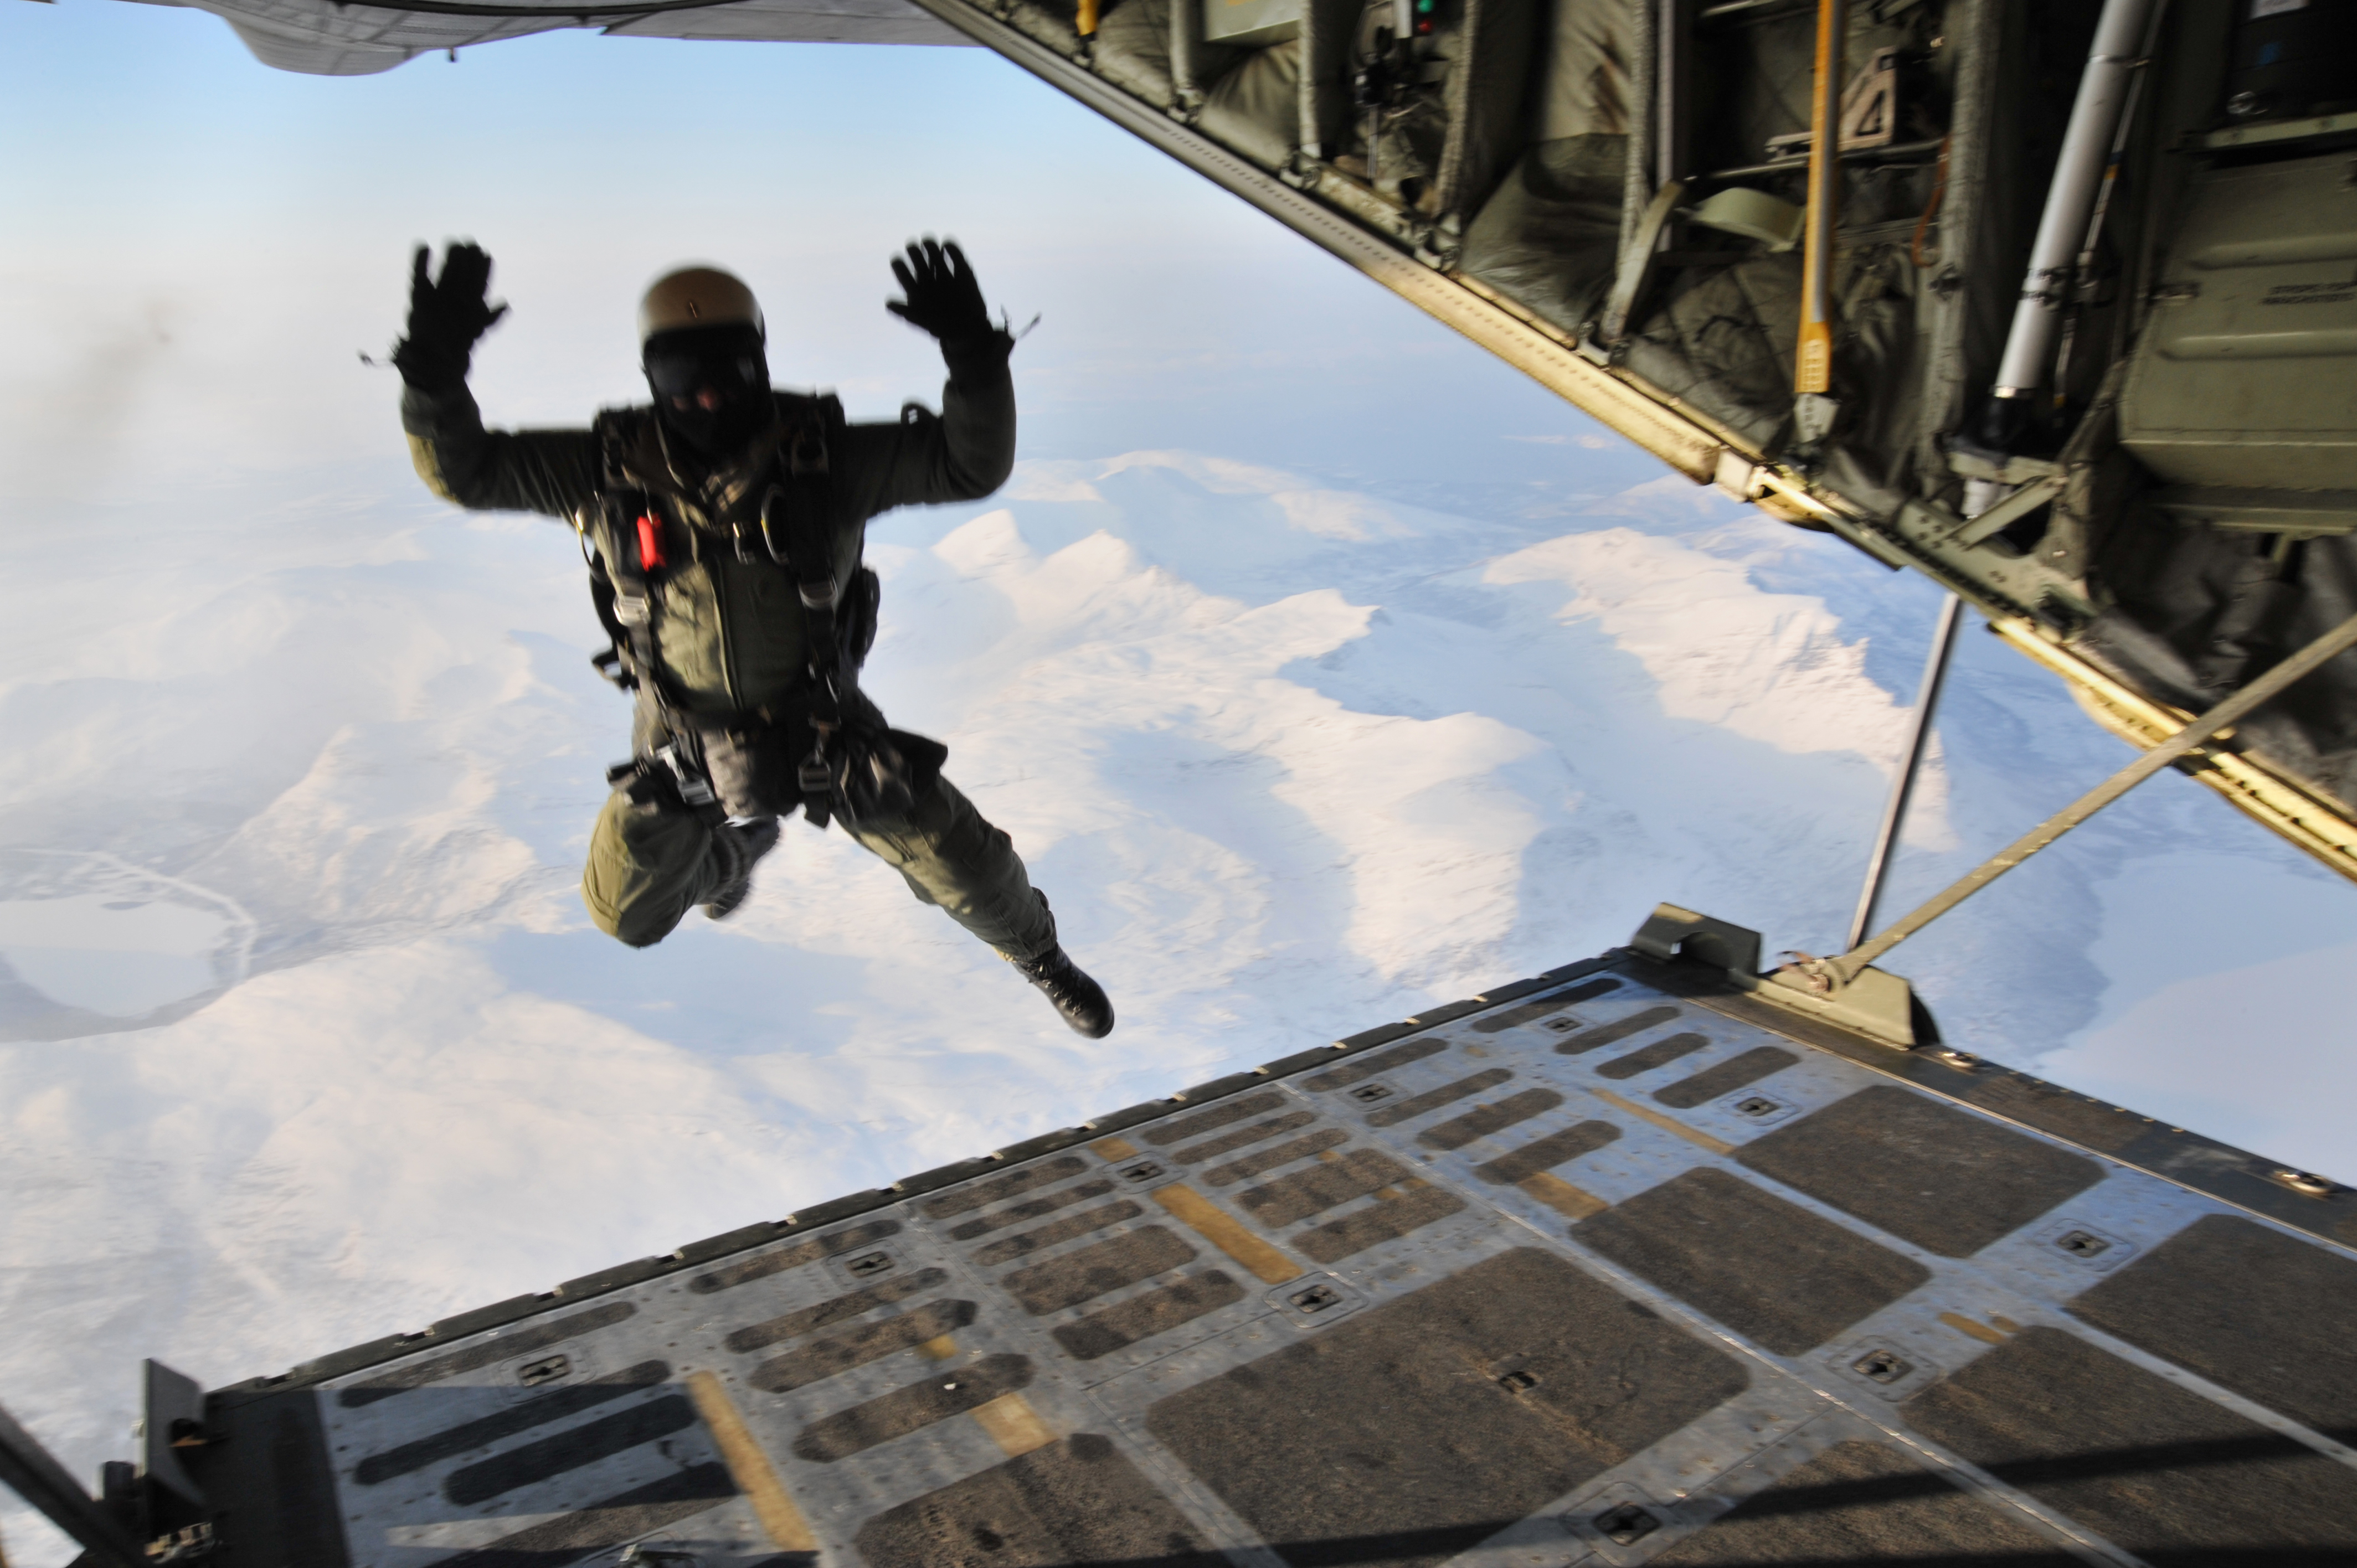 File:US Navy 100223-N-7162M-315 A Navy SEAL freefalls from an ...